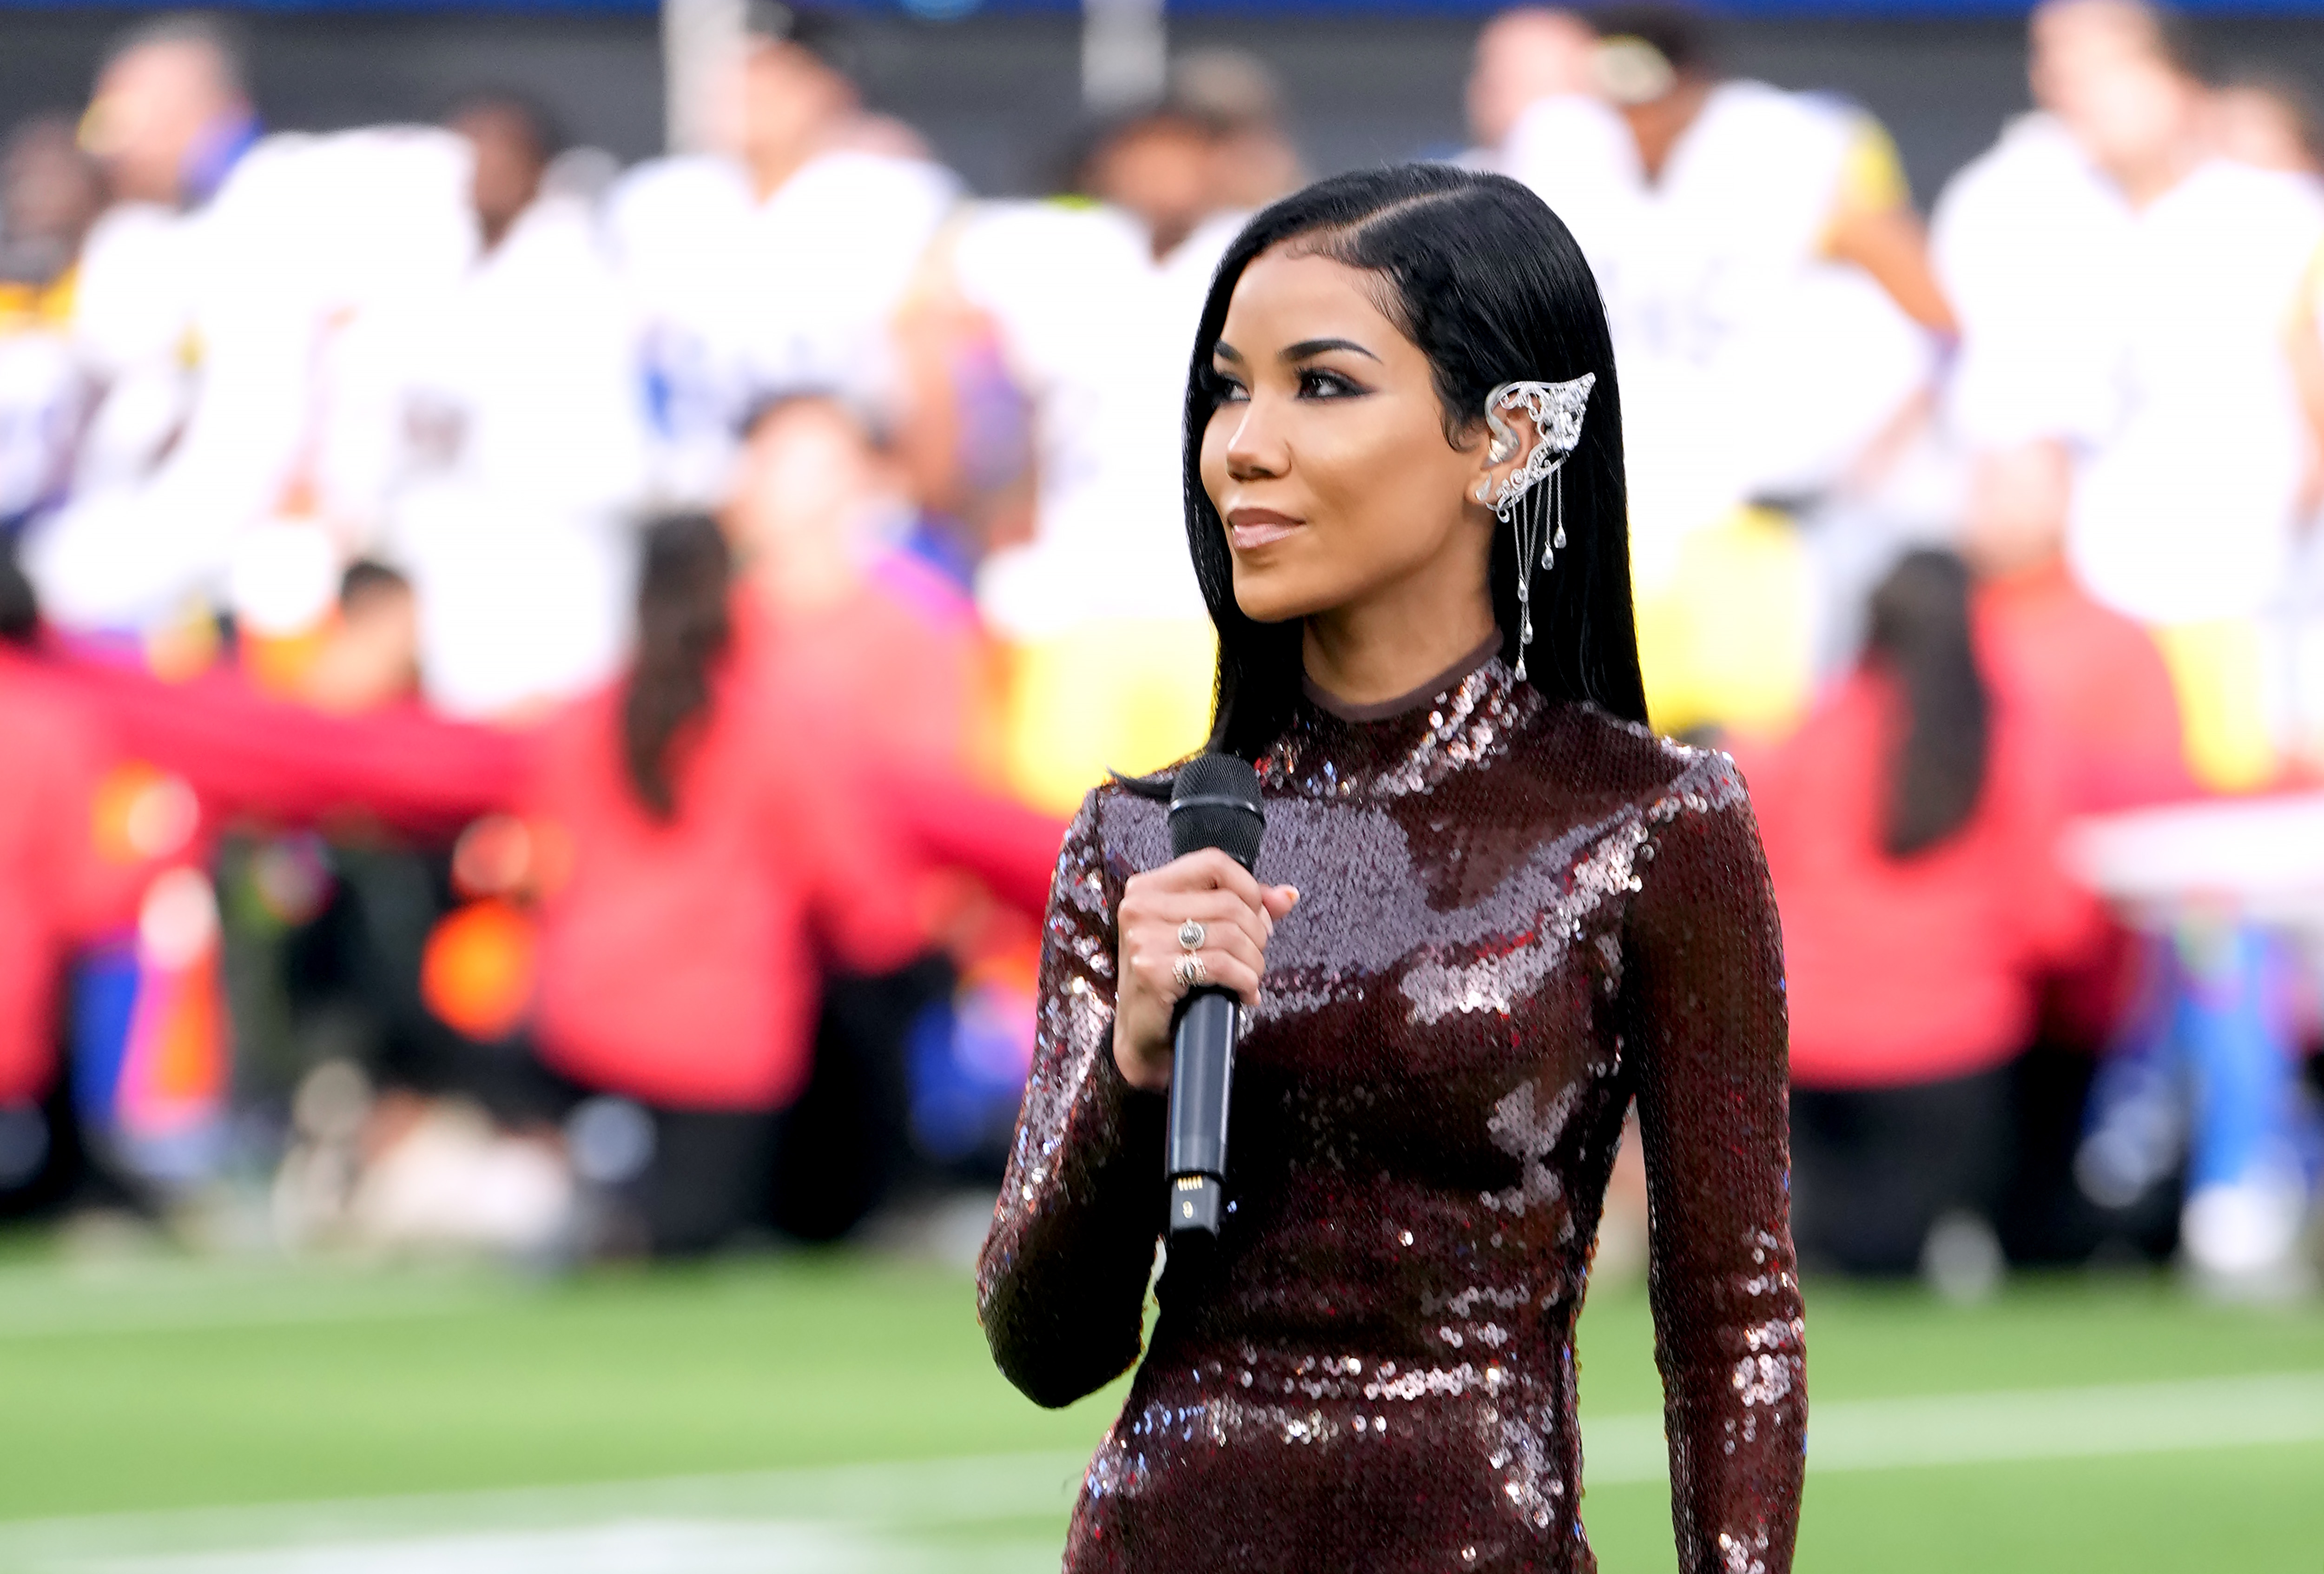 Jhené Aiko performs America the Beautiful during the Super Bowl LVI Pregame at SoFi Stadium on February 13, 2022, in Inglewood, California. | Source: Getty Images